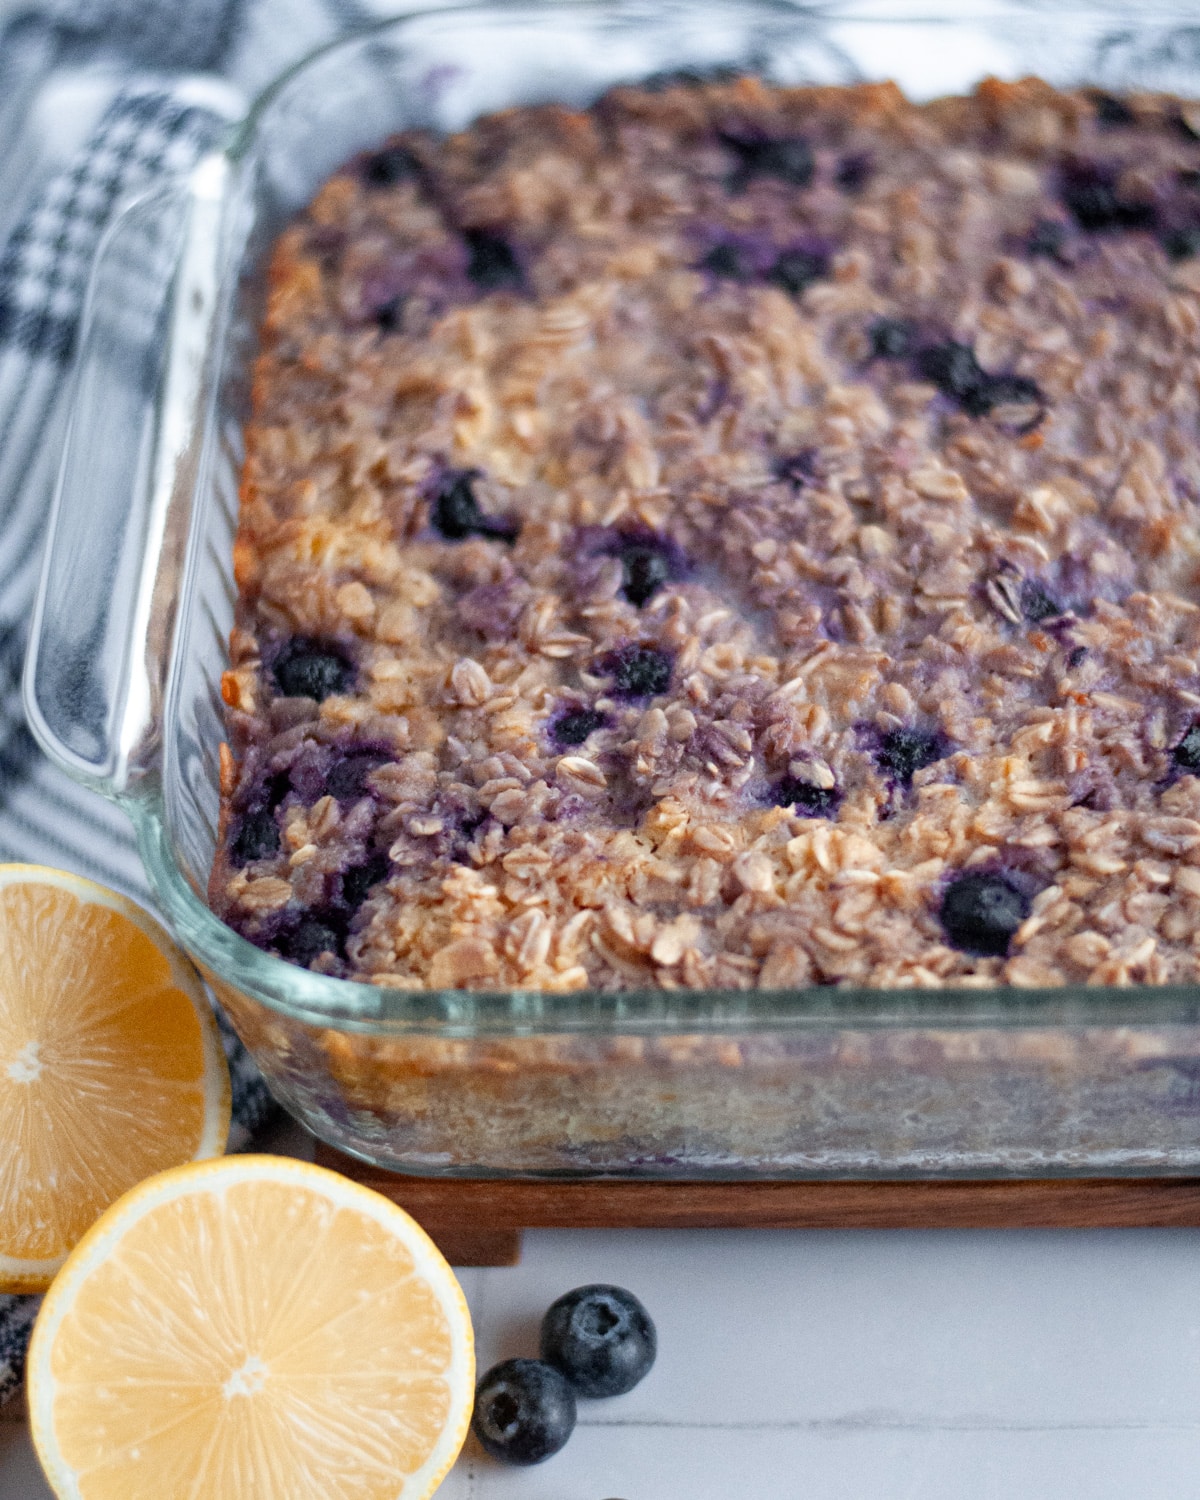 Glass 9x9 baking pan with a golden brown blueberry lemon baked oatmeal fresh out of the oven.